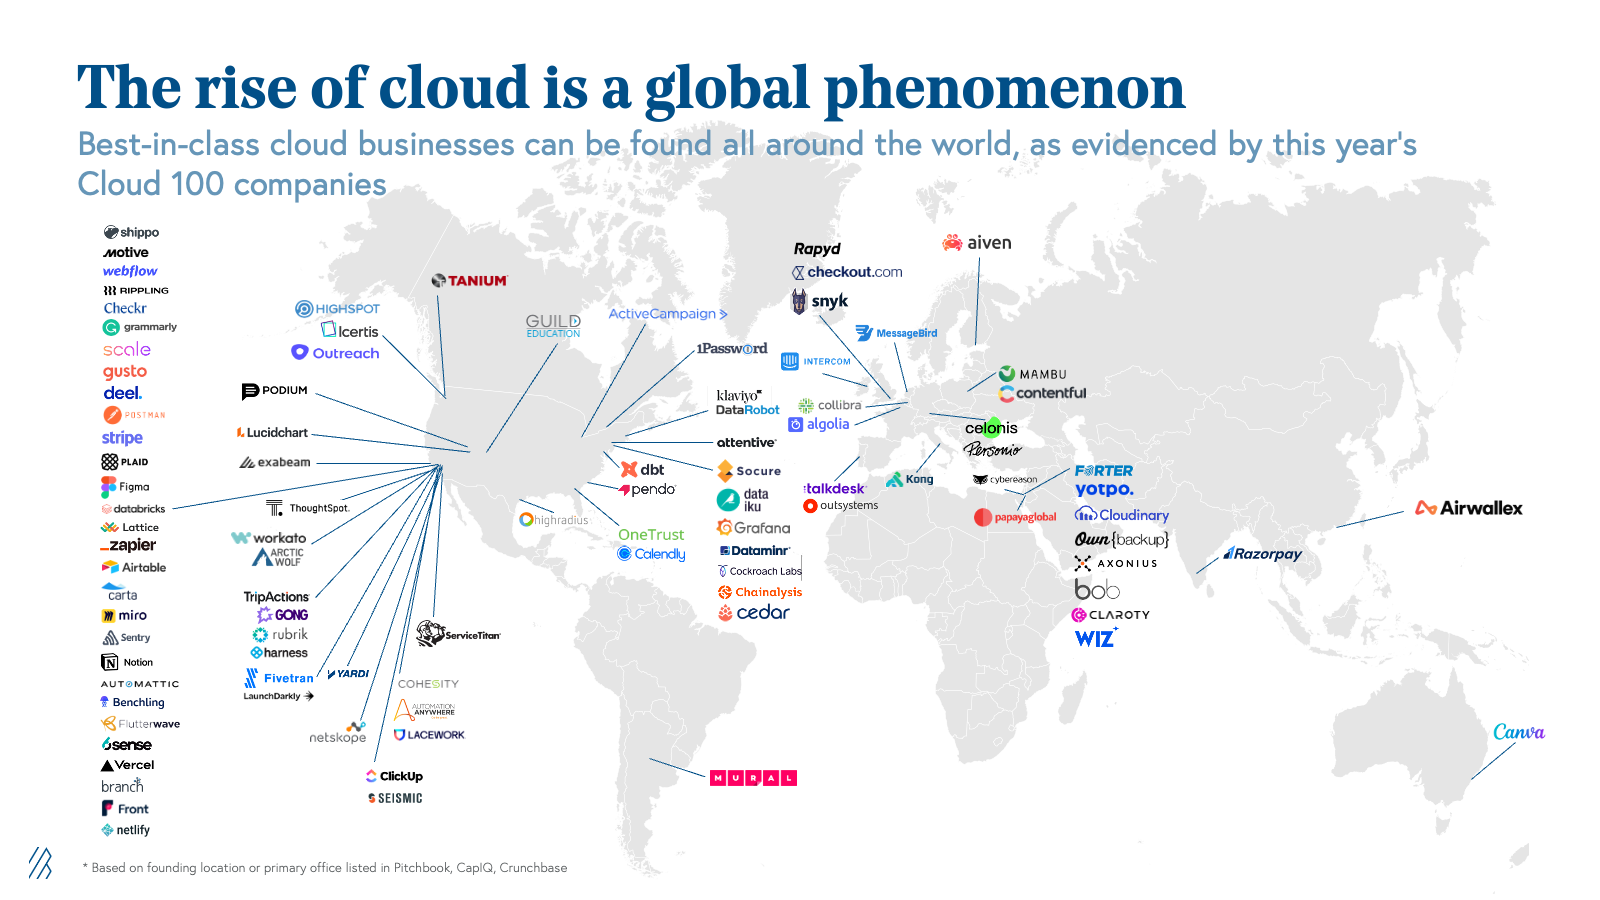 The rise of cloud is a global phenomenon